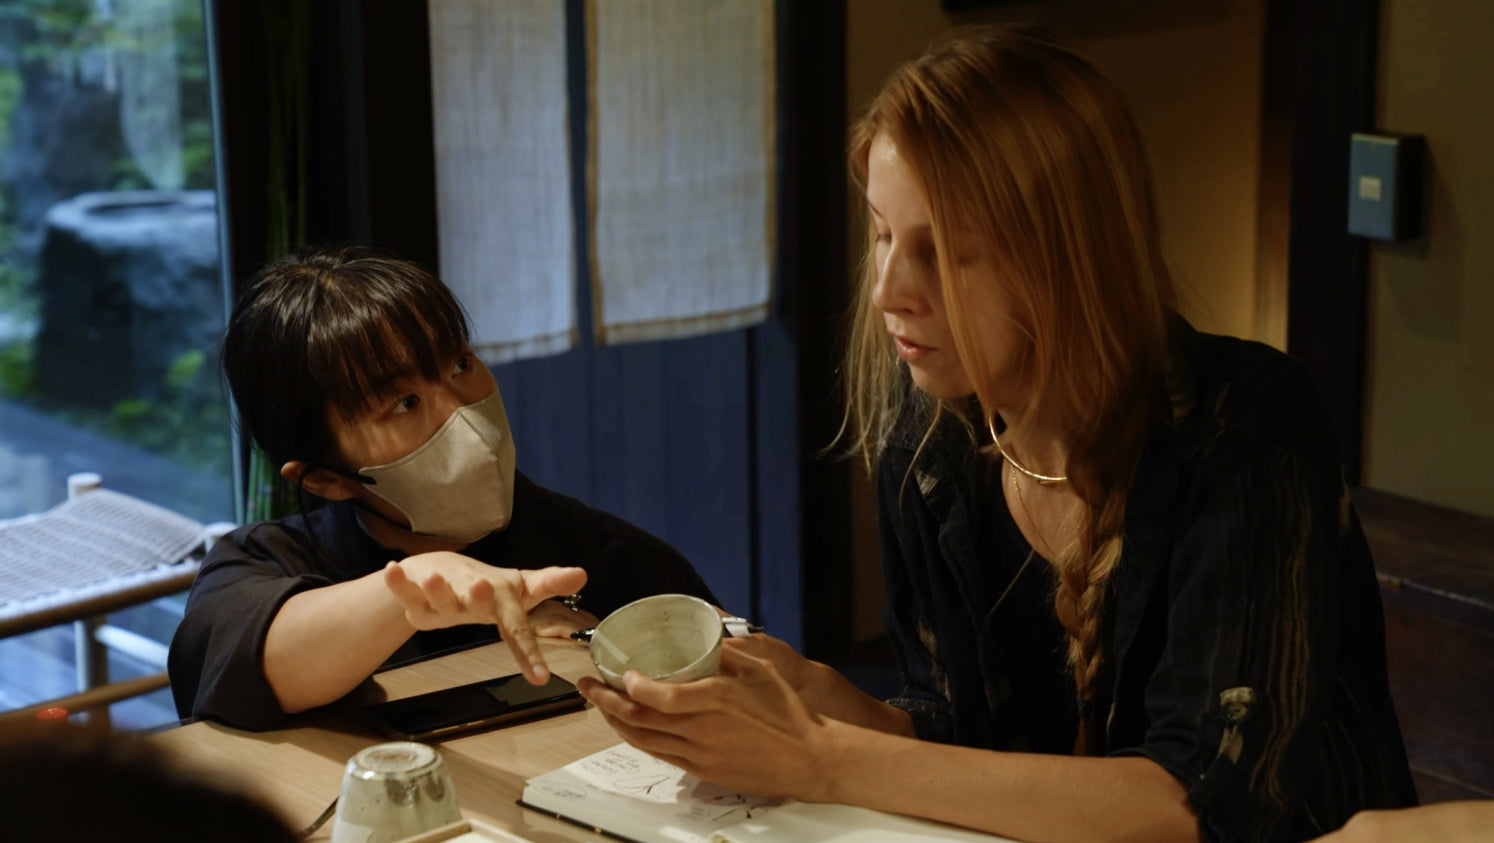 Load video: POJ Studio’s two-month intensive program. Study to practice and share the craft of kintsugi-repair with the world, through our 150-hour apprenticeship in Kyoto.